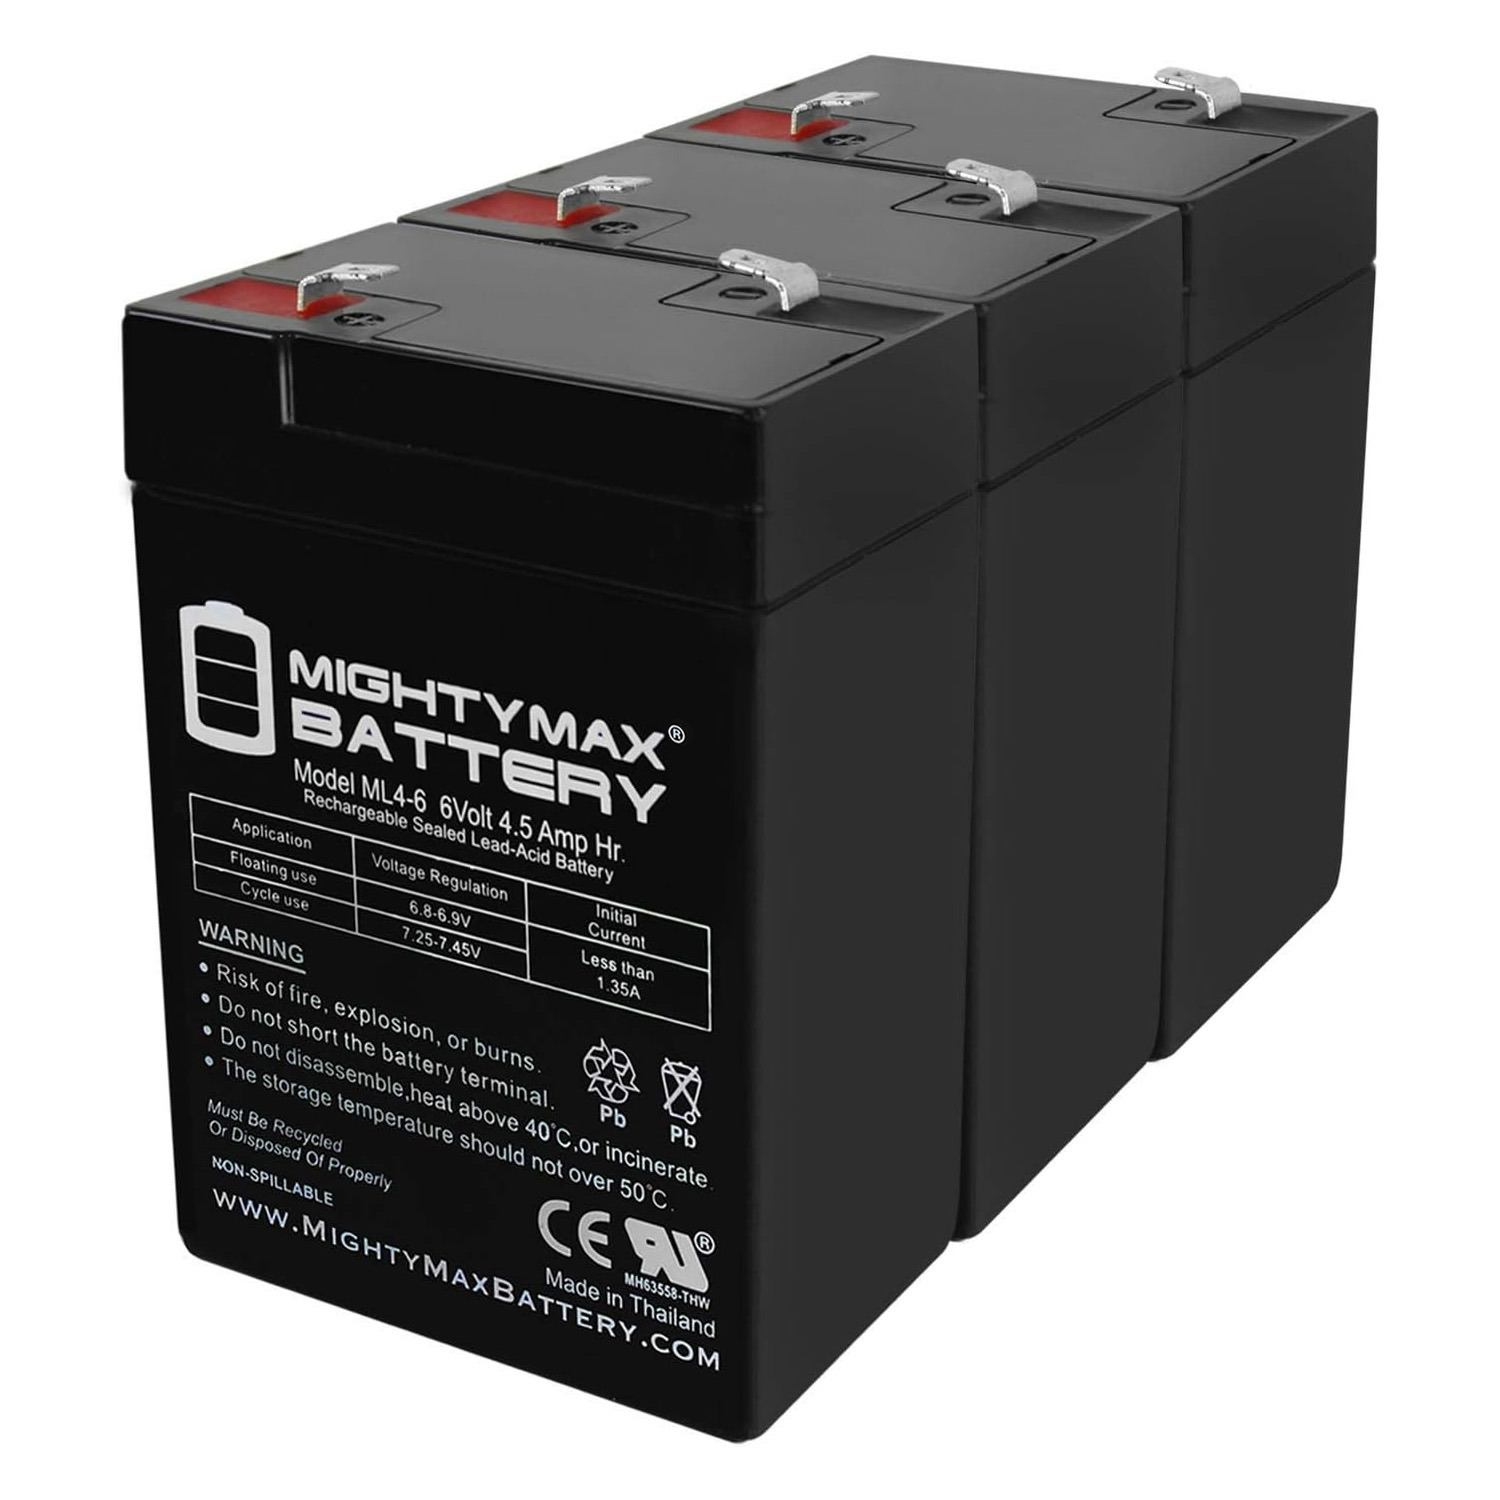 6V 4.5AH SLA Replacement Battery for Big Beam 2CL6S5 - 3 Pack